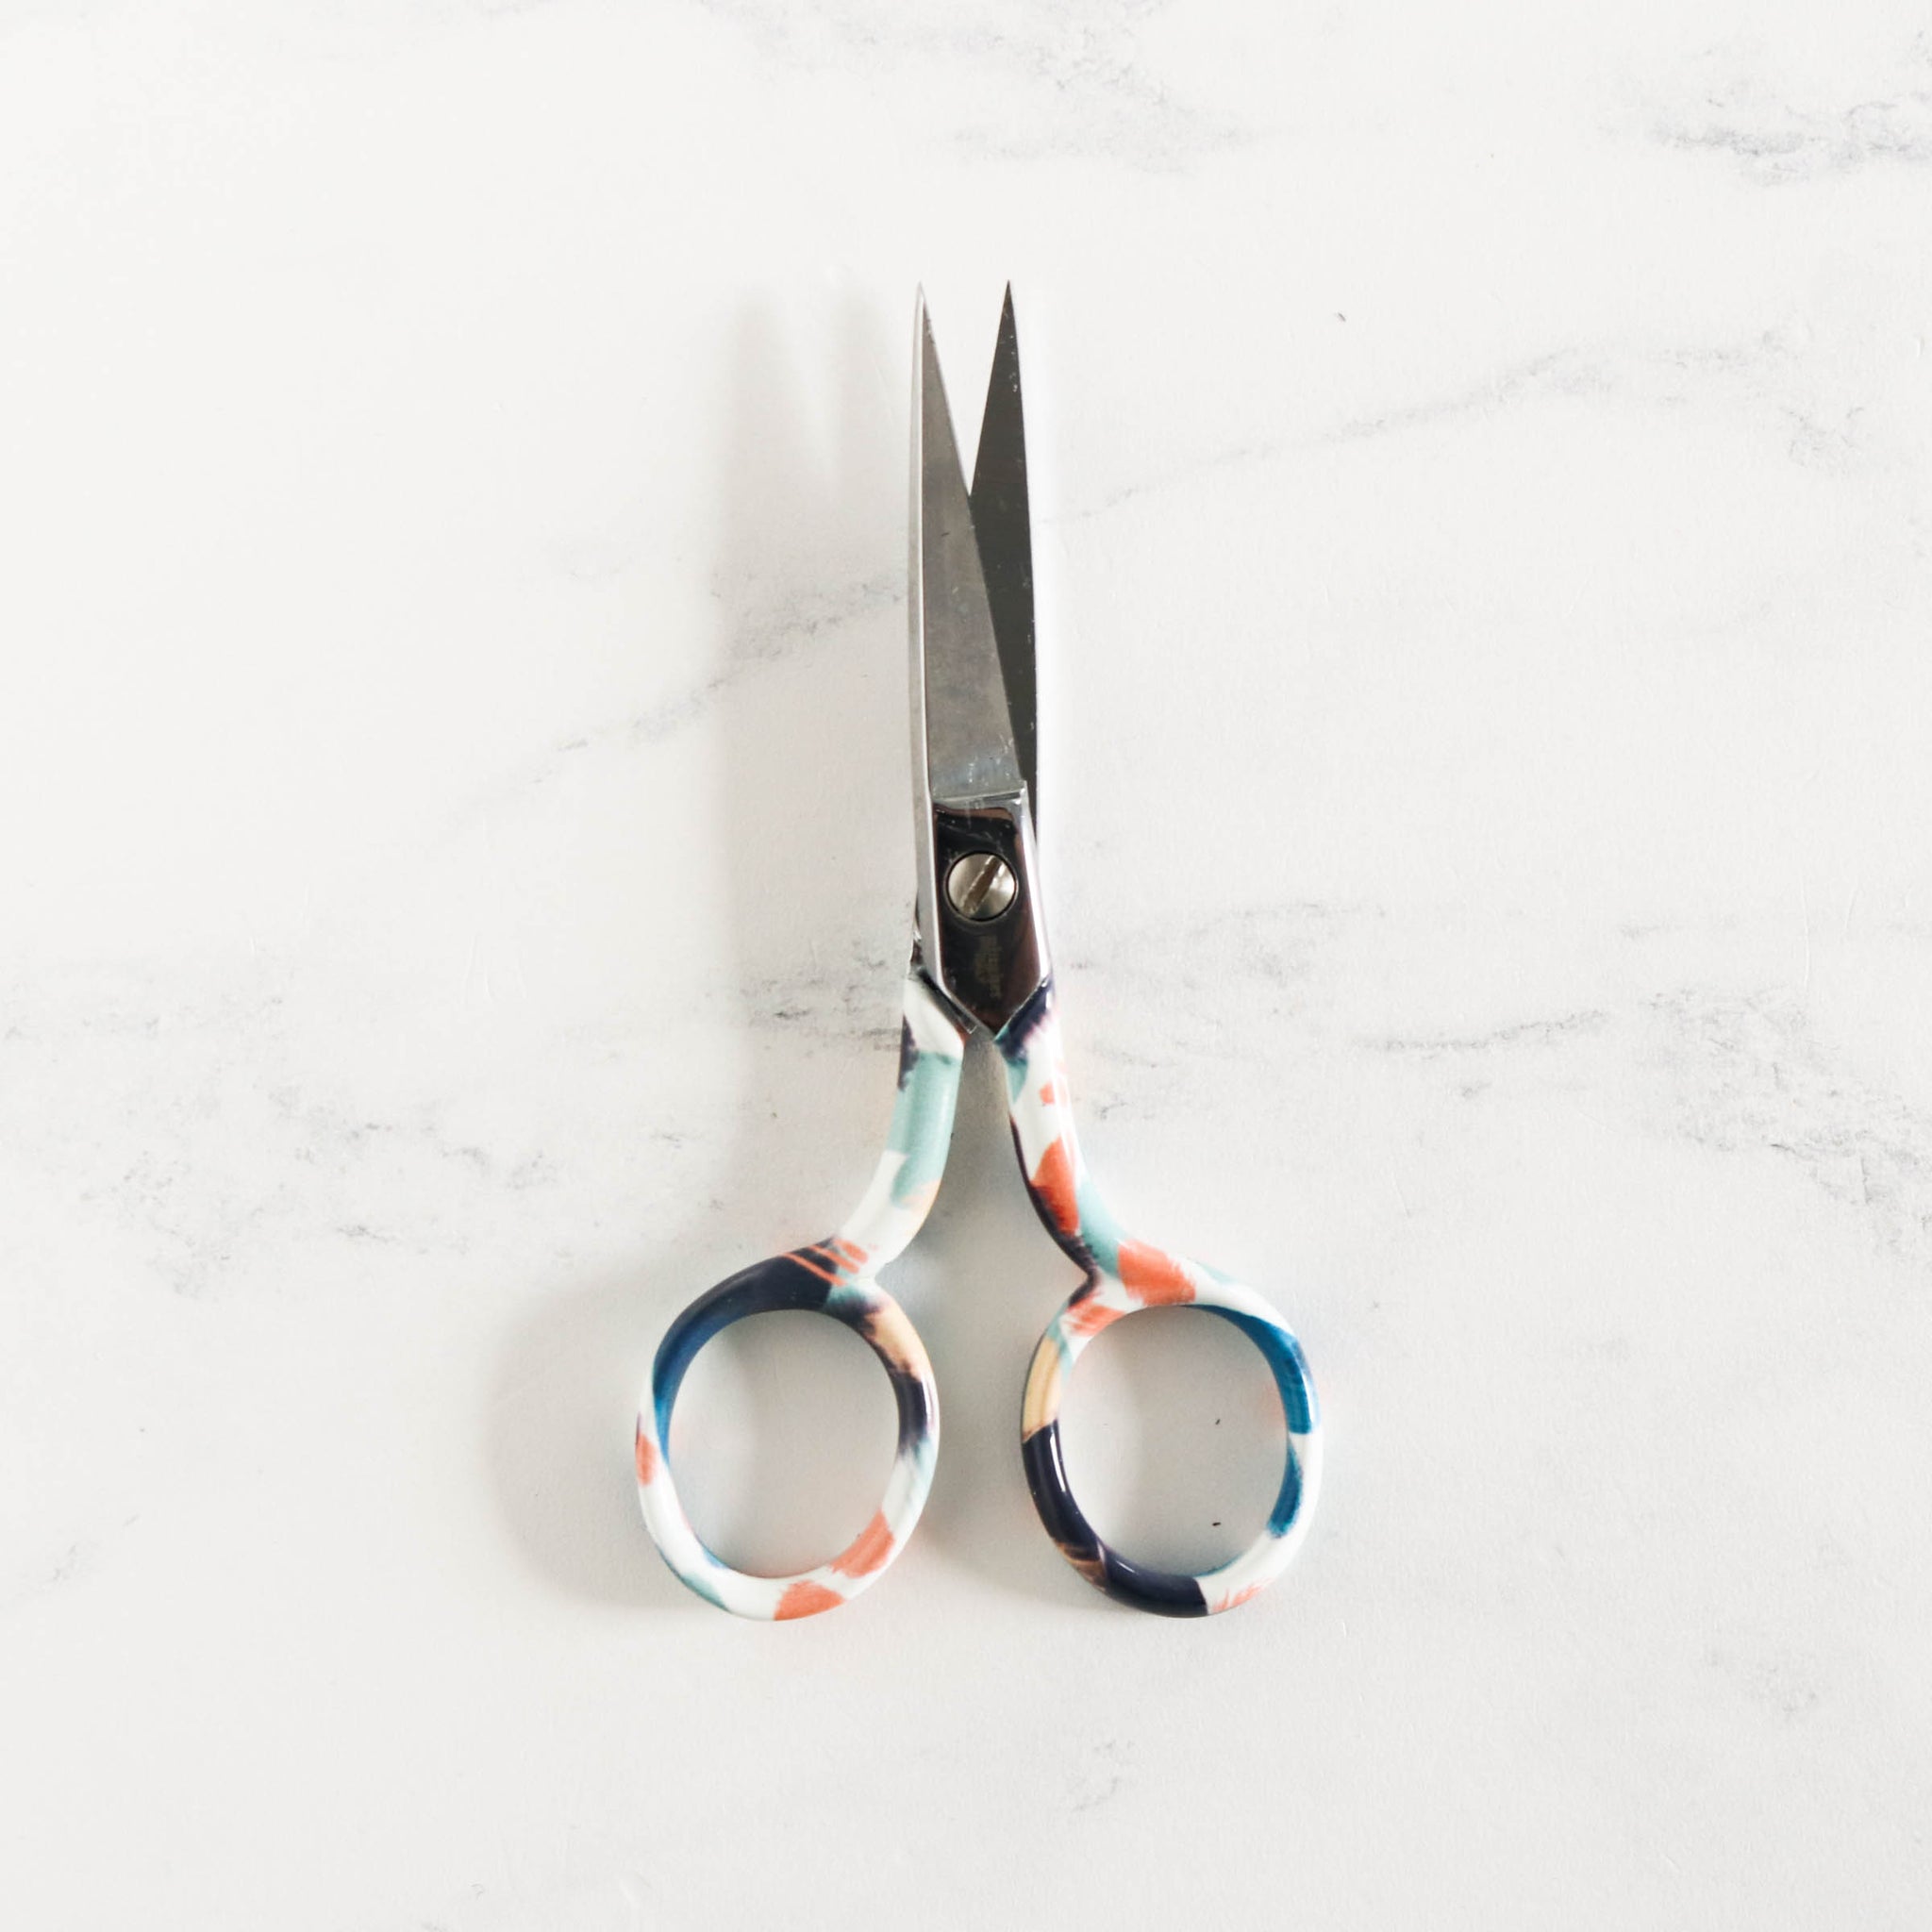 Gingher Designer Series Shears and Embroidery Scissors - Rynn - Stitched  Modern